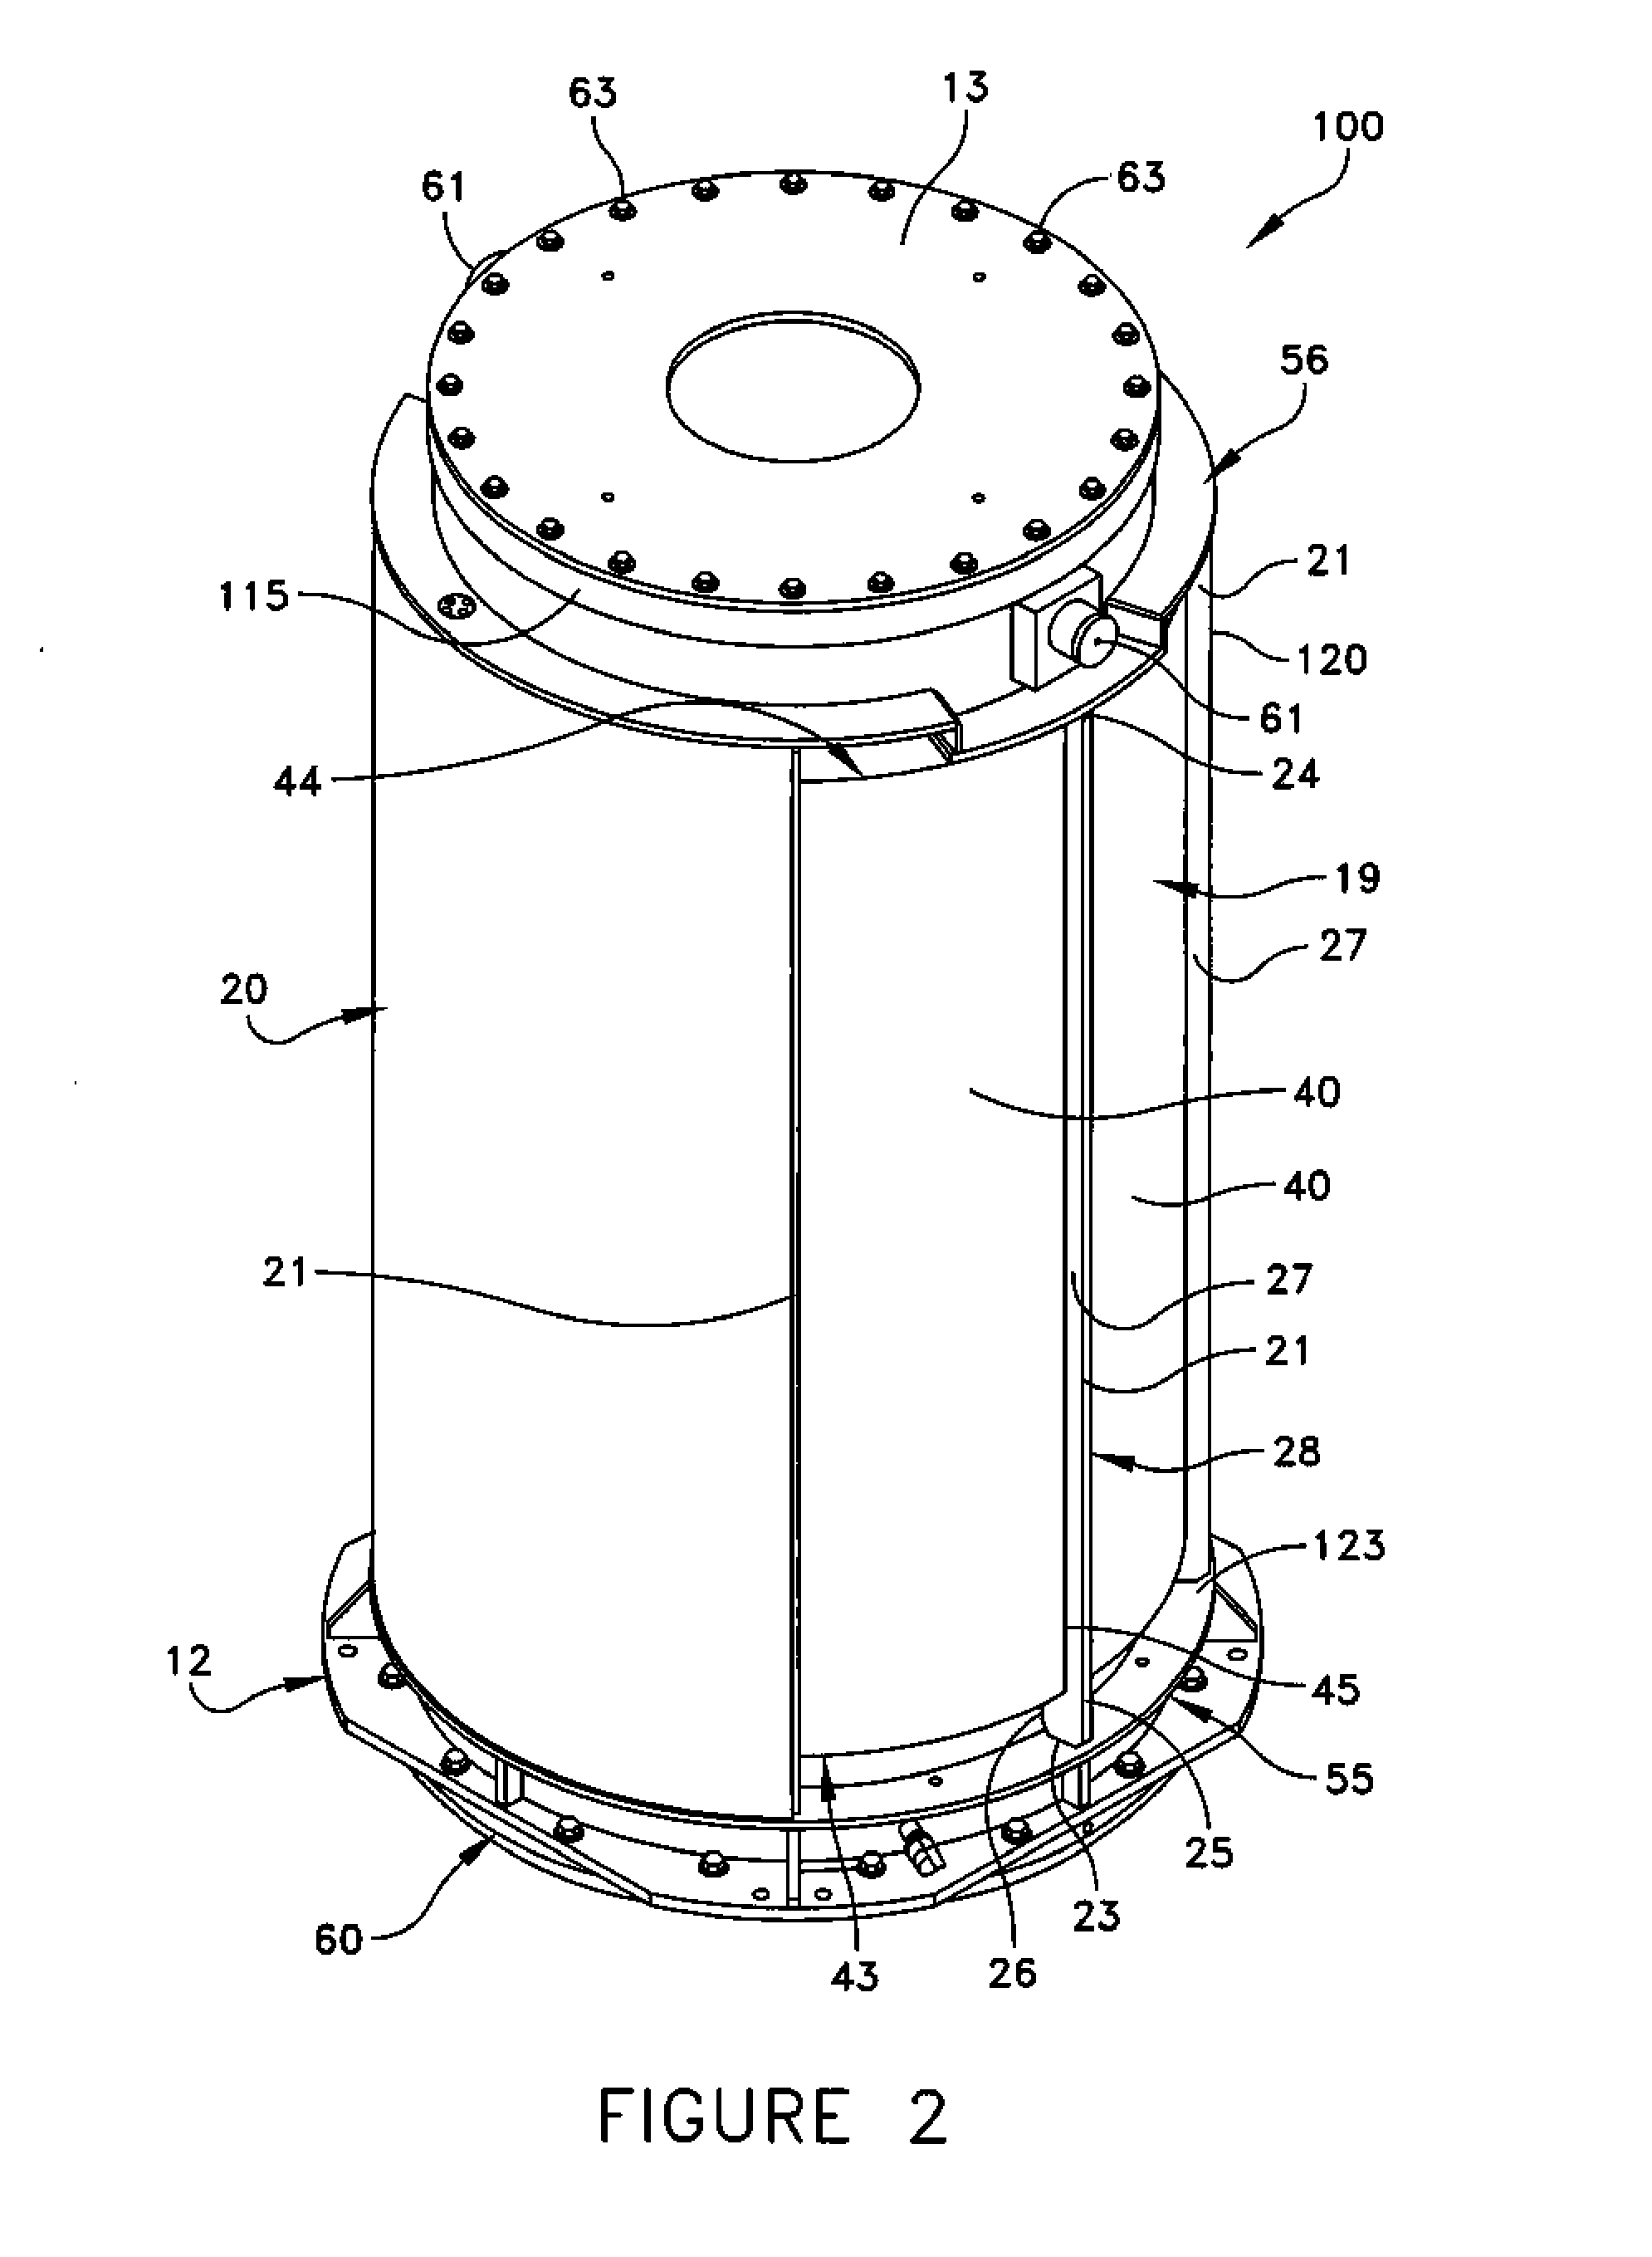 Method of removing radioactive materials from a submerged state and/or preparing spent nuclear fuel for dry storage